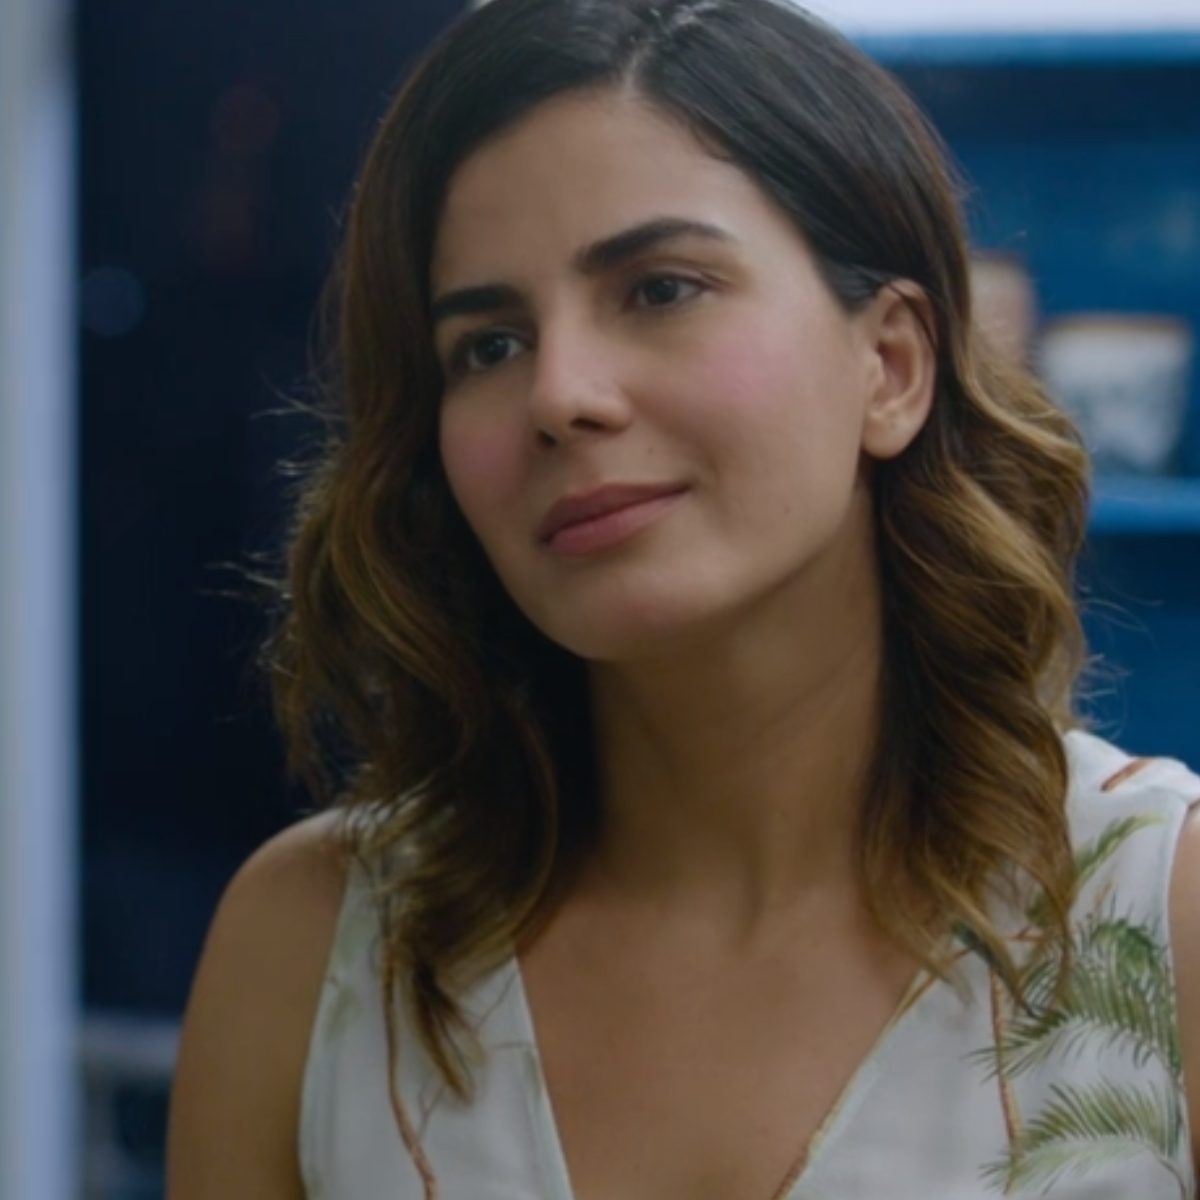 EXCLUSIVE: Kirti Kulhari on Four More Shots Please season 3, dealing with pressure, key takeaways and more